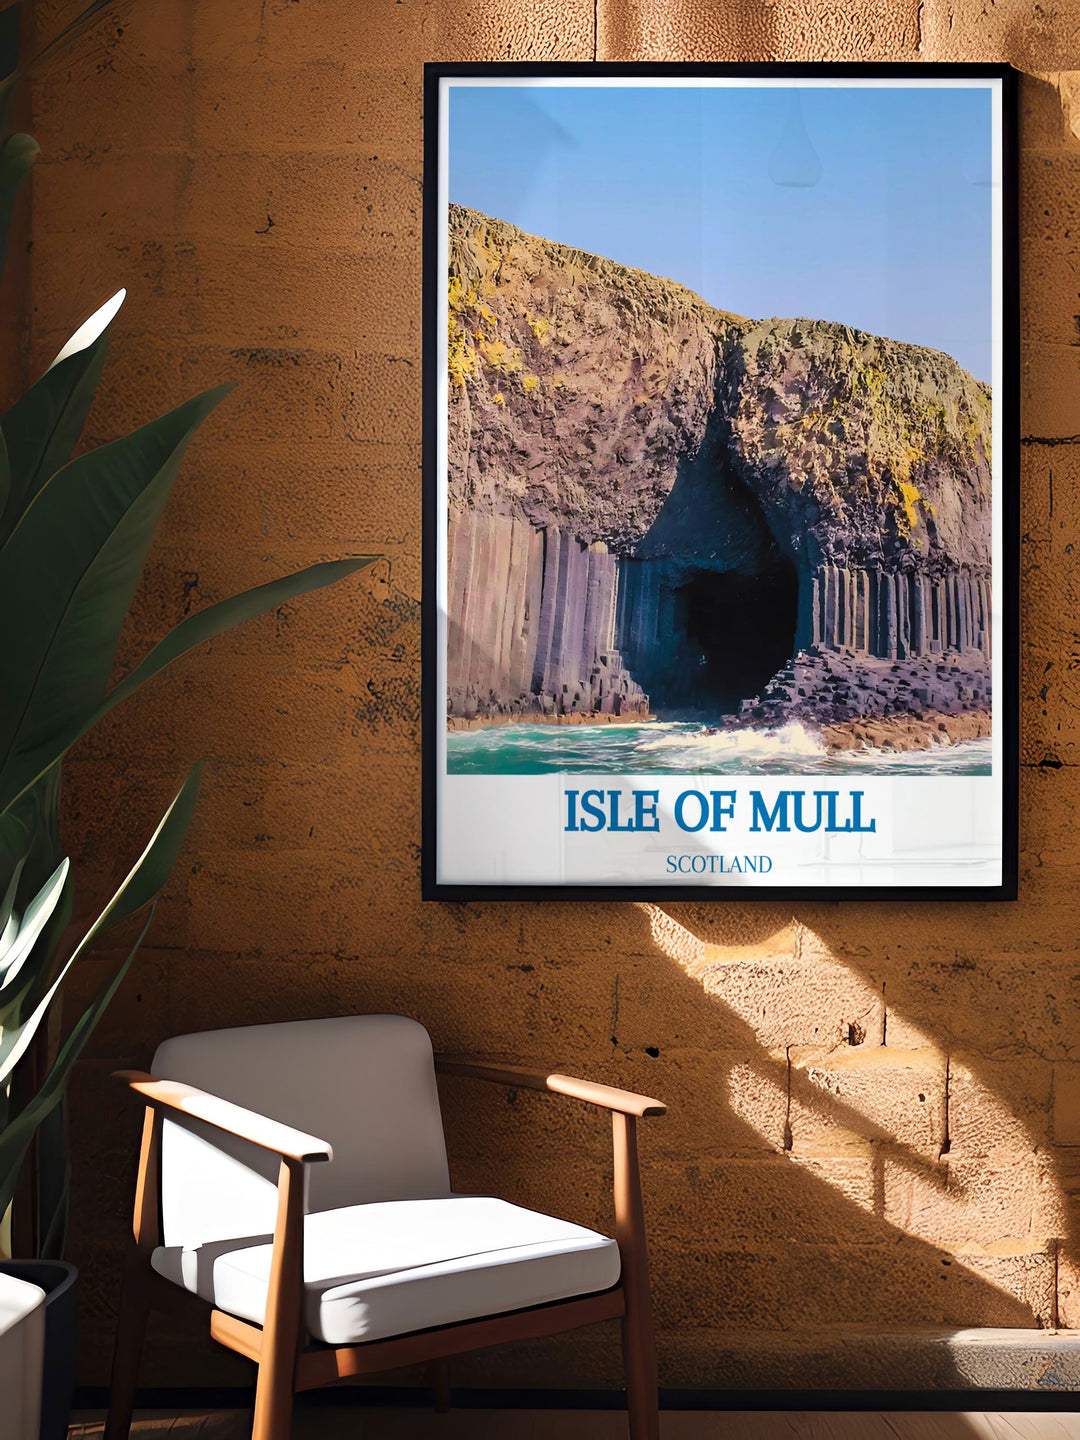 Framed art print of Fingals Cave perfect for those who appreciate natural wonders and geological formations